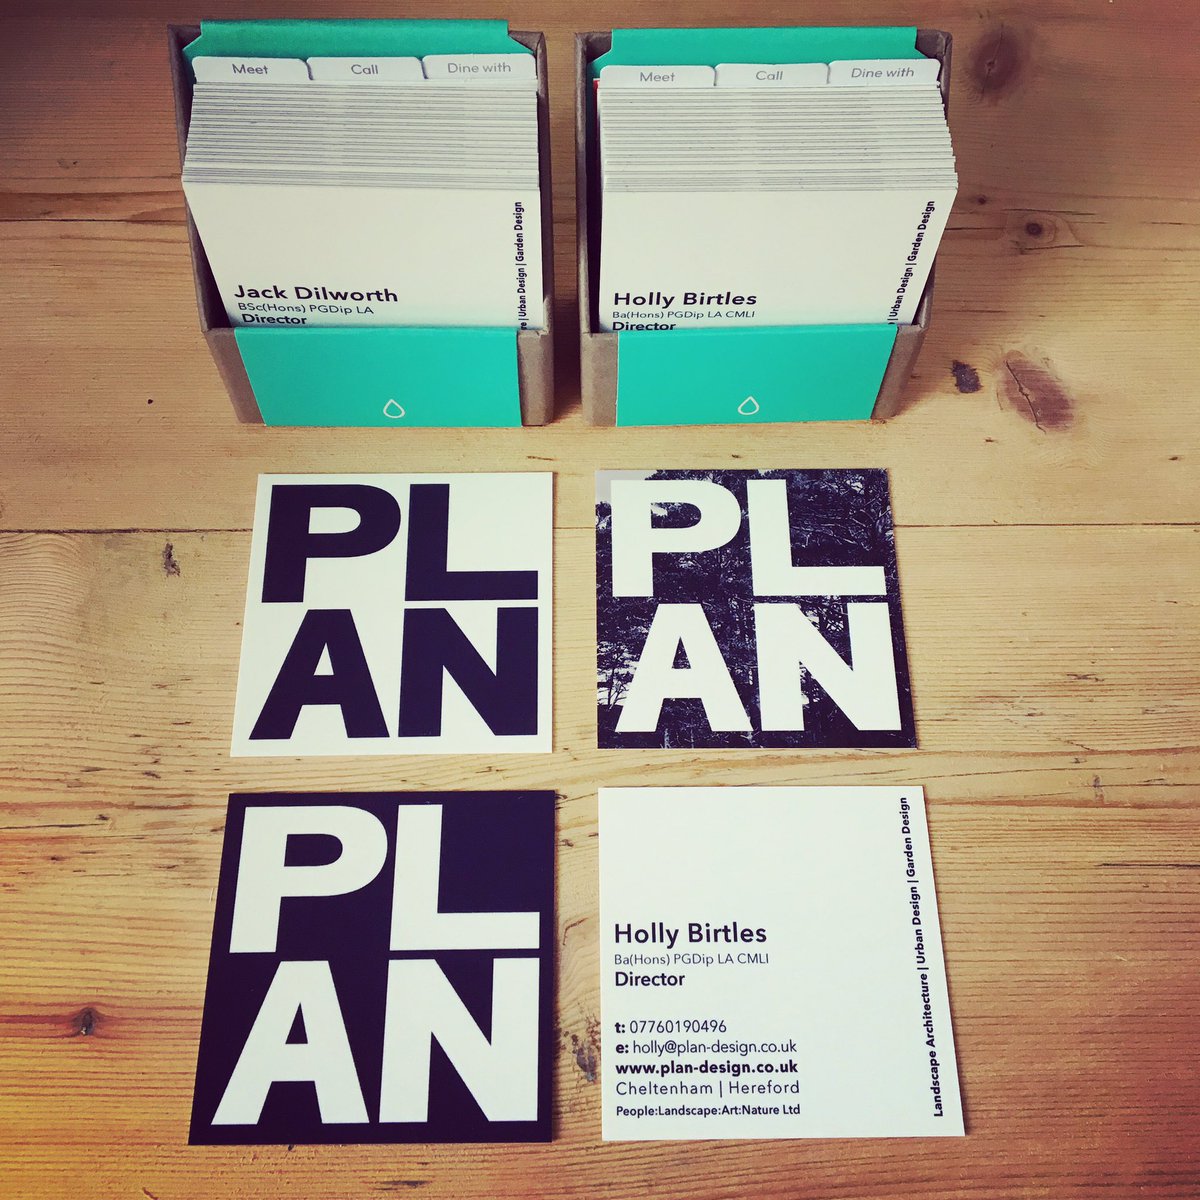 Exciting delivery yesterday from @moo super pleased with the speed and quality #businesscards #graphicdesign #newbusiness #startup #landscapearchitects #urbandesign #gardendesign #chooselandscape #plandesign